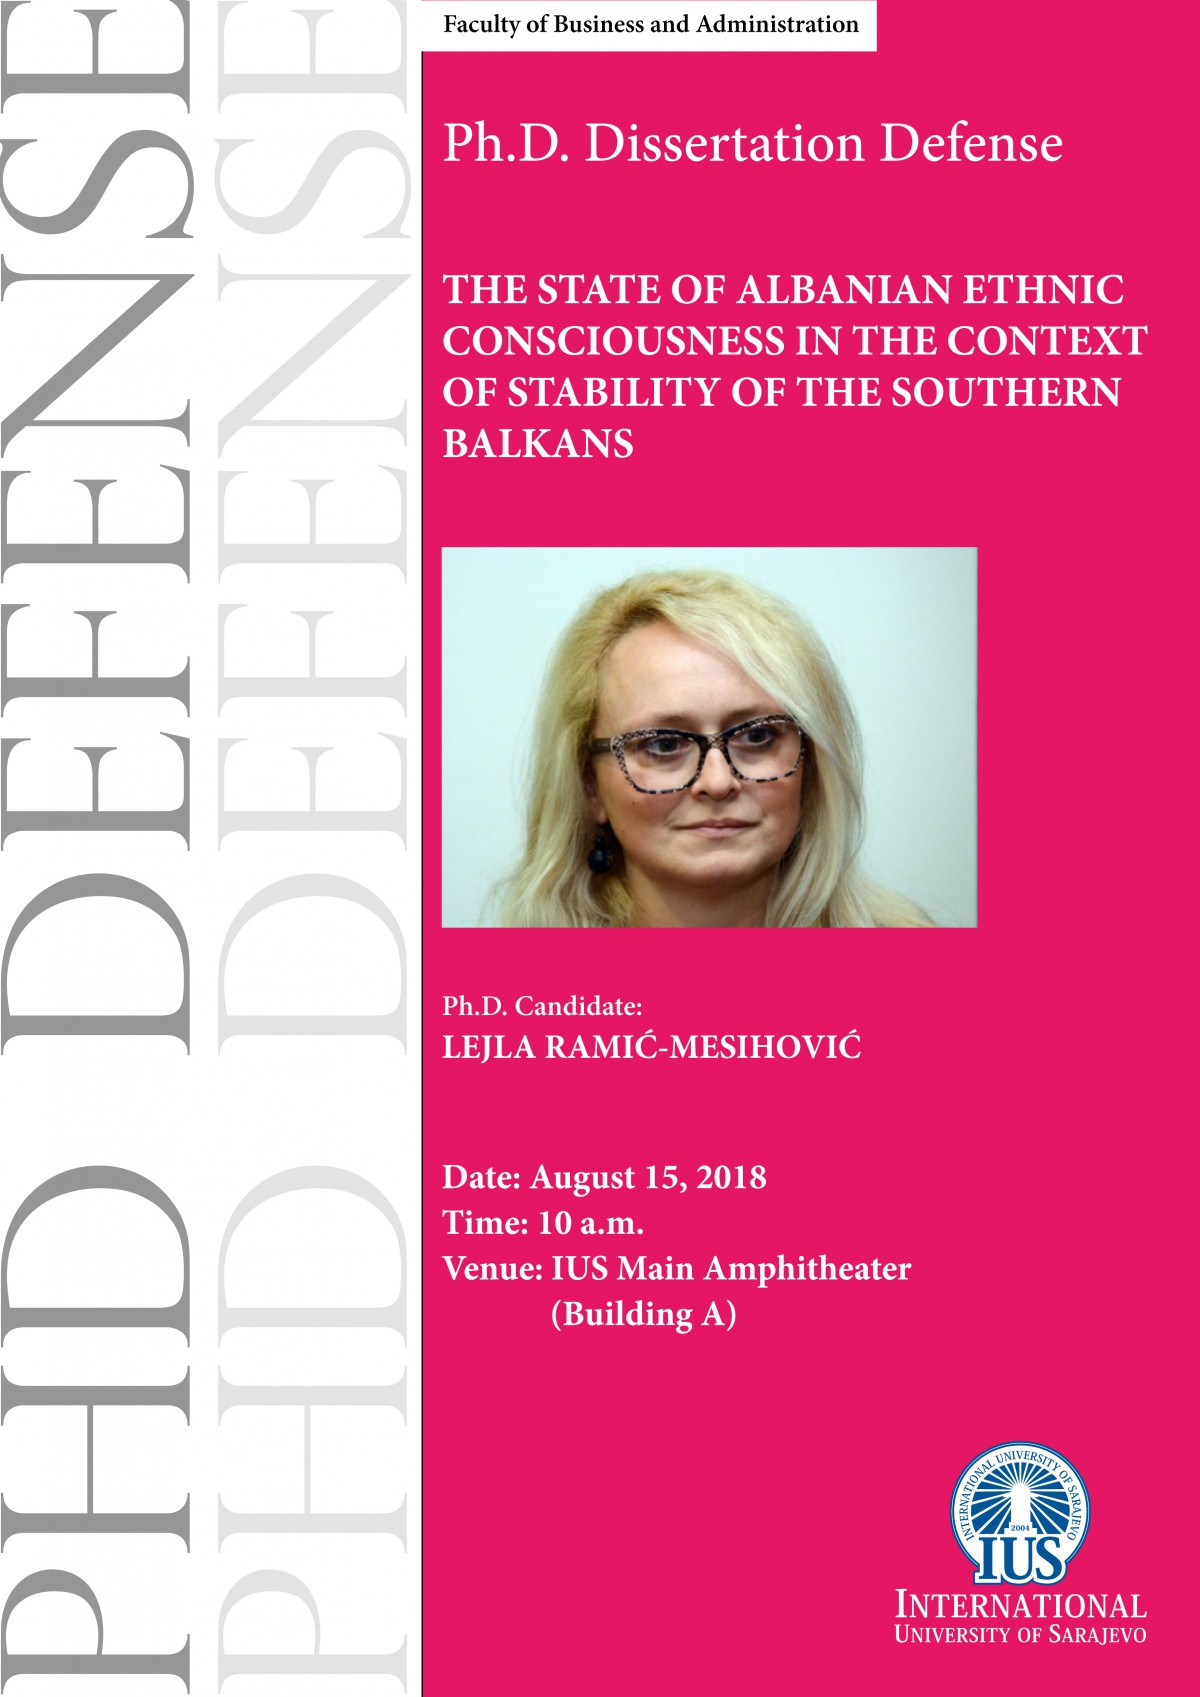  THE STATE OF ALBANIAN ETHNIC CONSCIOUSNESS IN THE CONTEXT OF STABILITY OF THE SOUTHERN BALKANS 